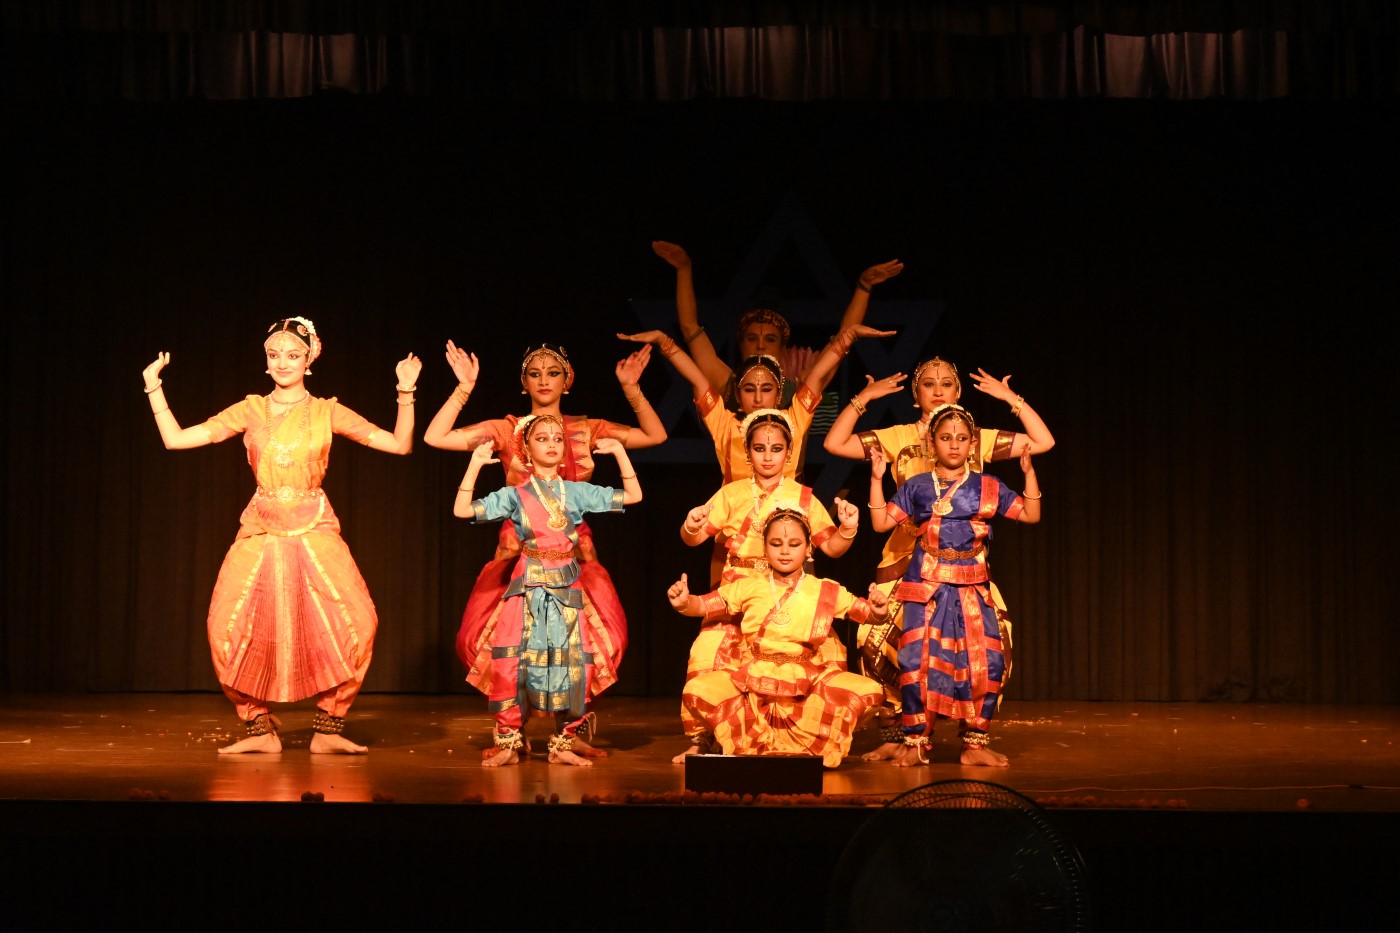 56th Annual Day celebrations of the evening classes of The Mother’s International School